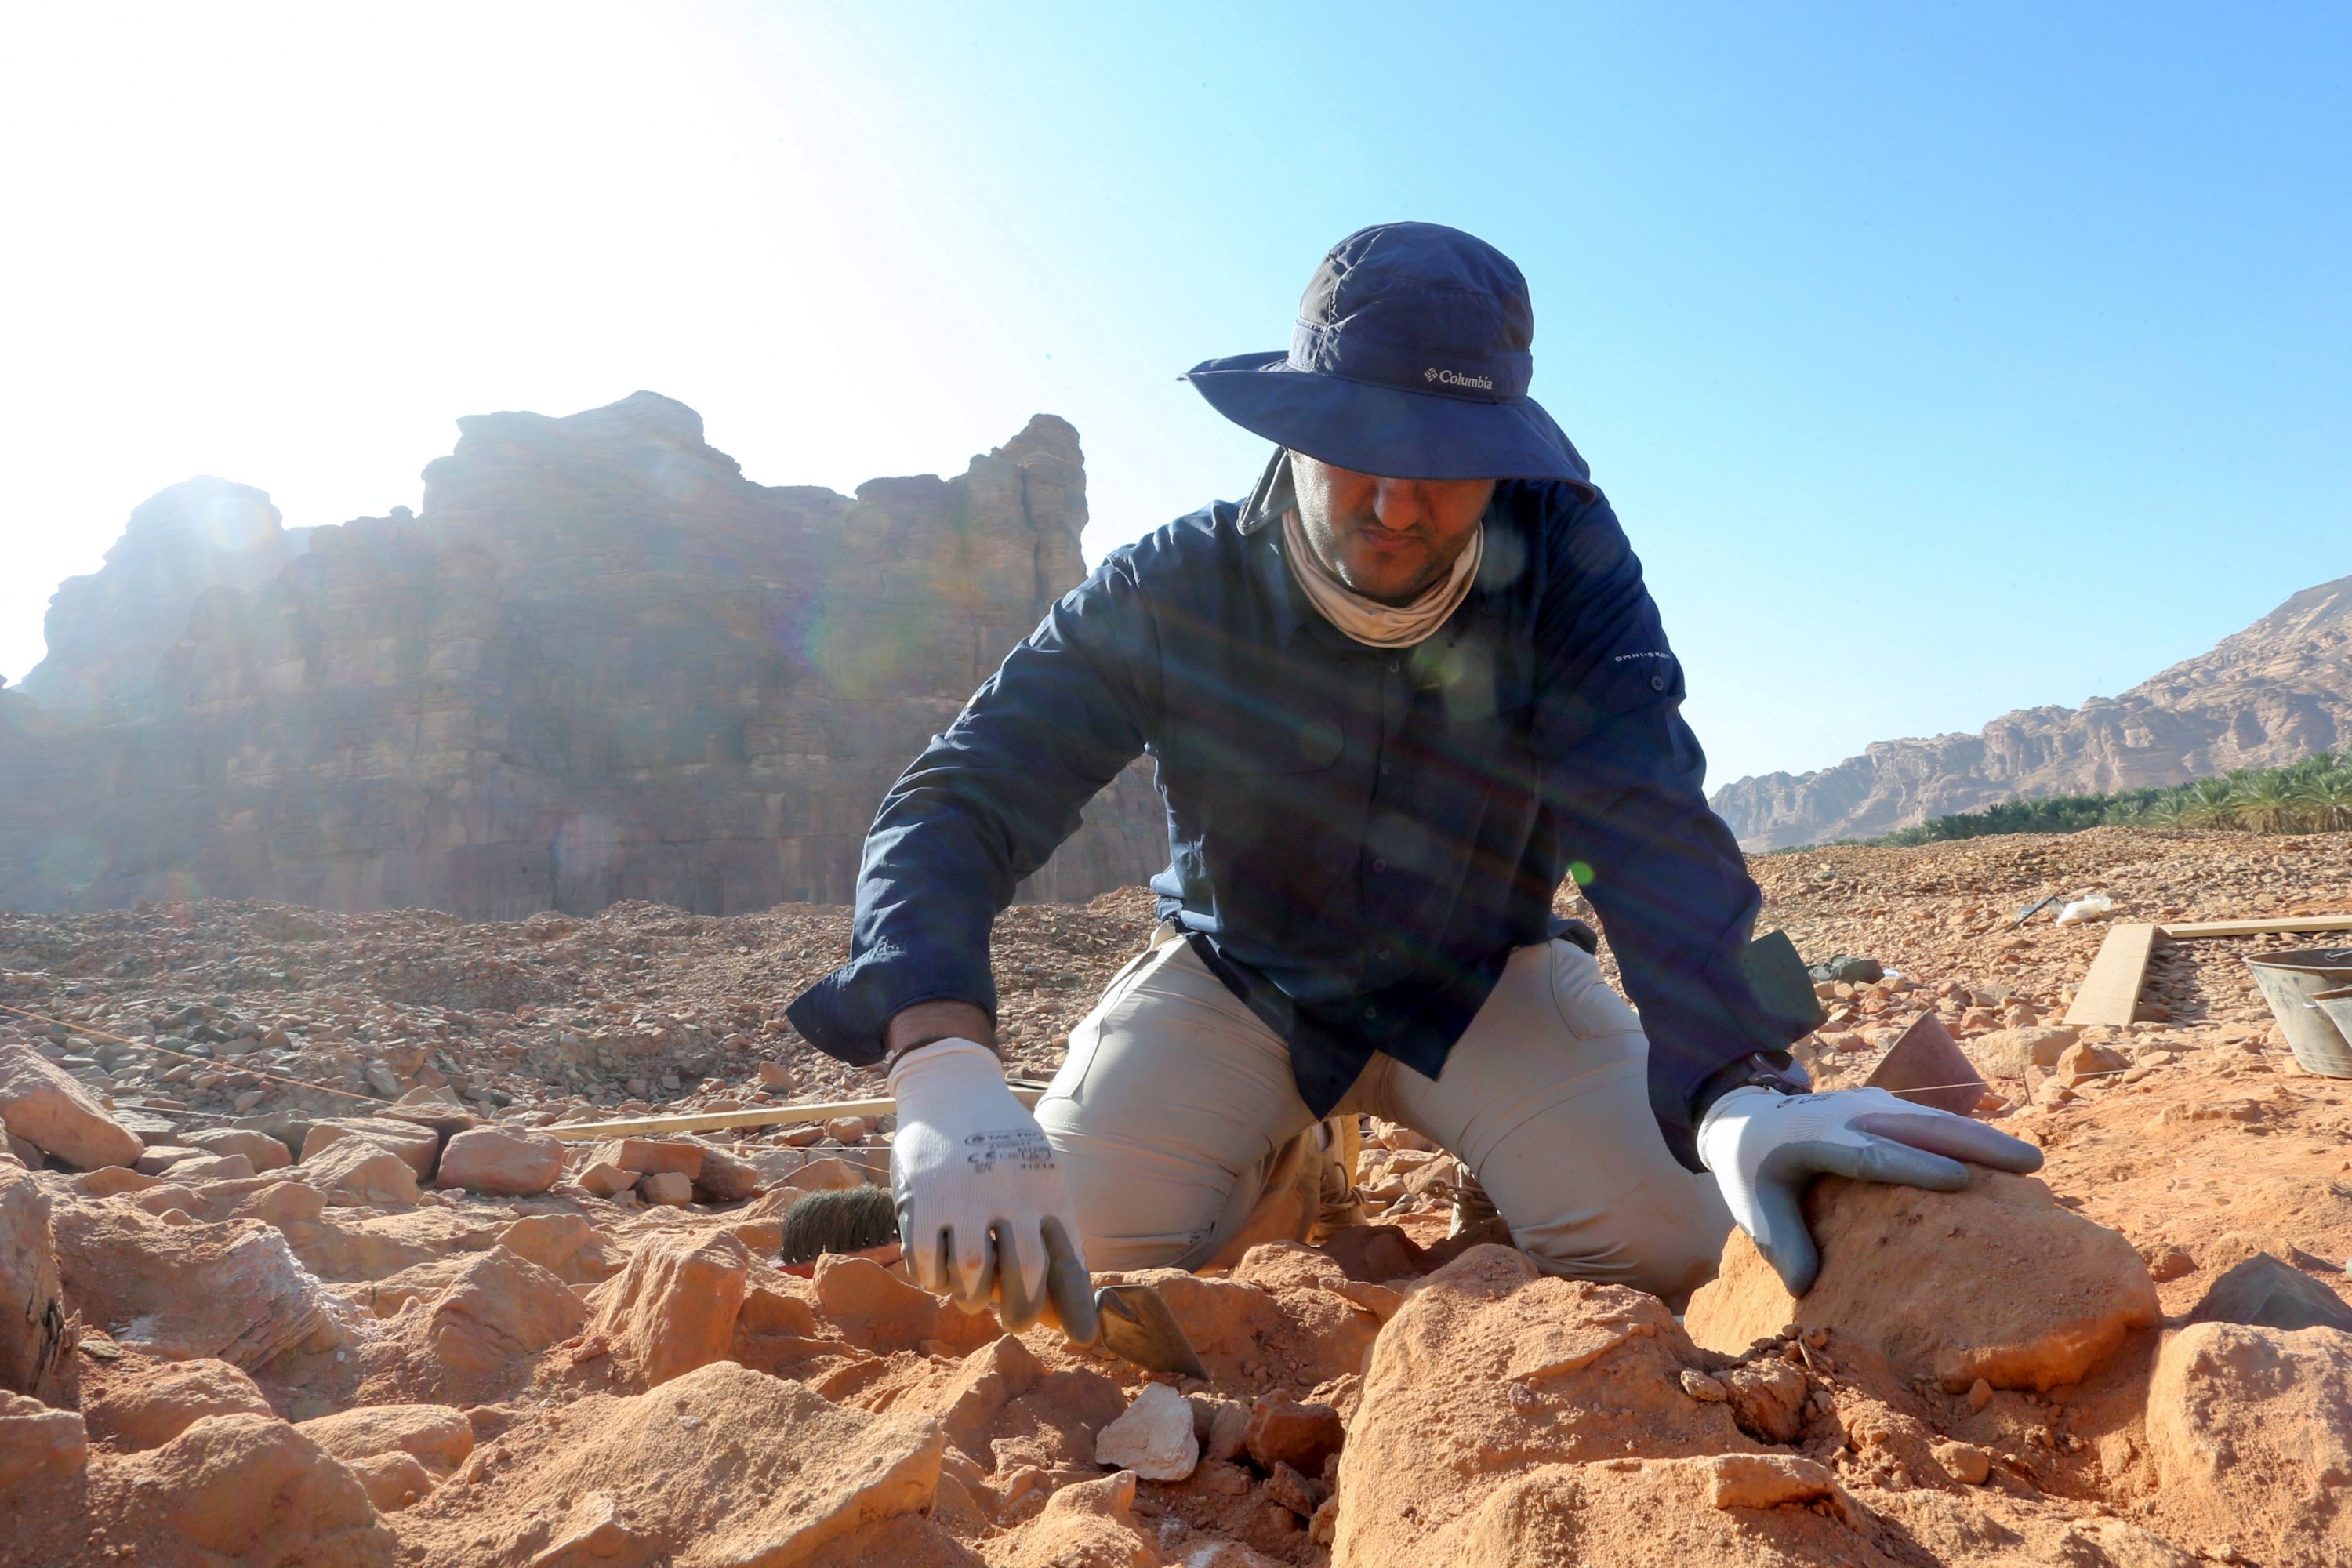 A Saudi archaeologist carefully cleans the pottery to examine the findings known to be from the Dadan and Lihyan civilization dated 1,000 B.C., Al-Ula, Saudi Arabia, Oct. 30, 2021. (Reuters Photo)